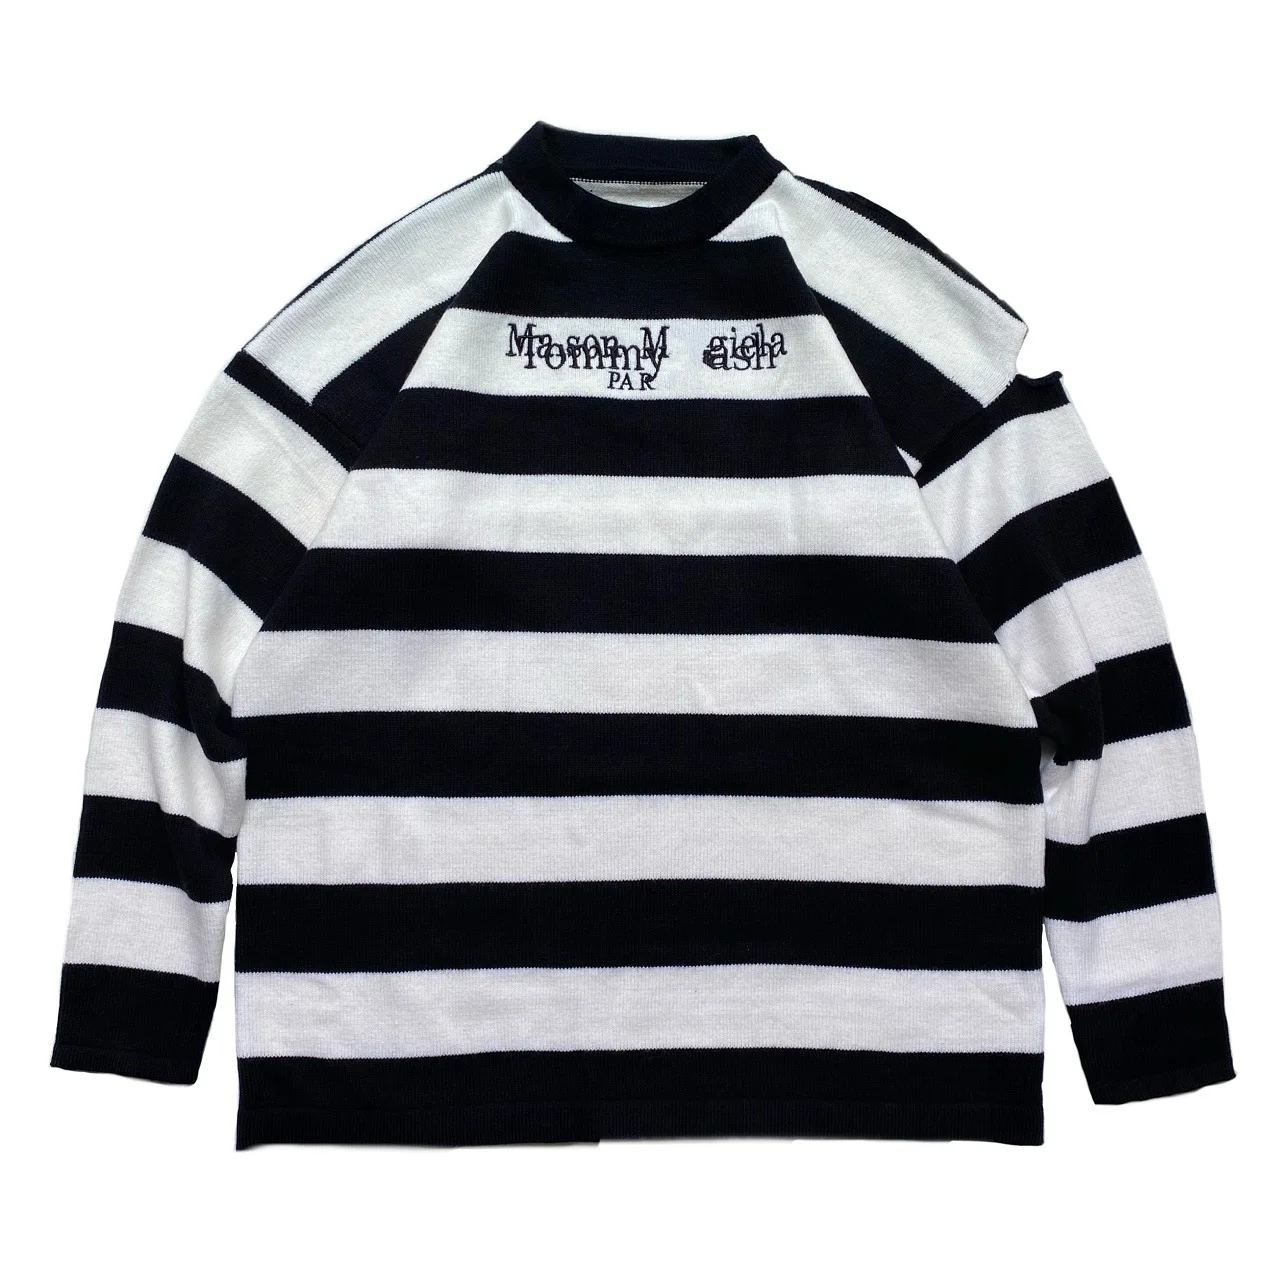 Kapital Vintage Black and White Stripe Fashion Embroidery Round Neck Men's and Women's Sweater Casual Letter Loose Pullover